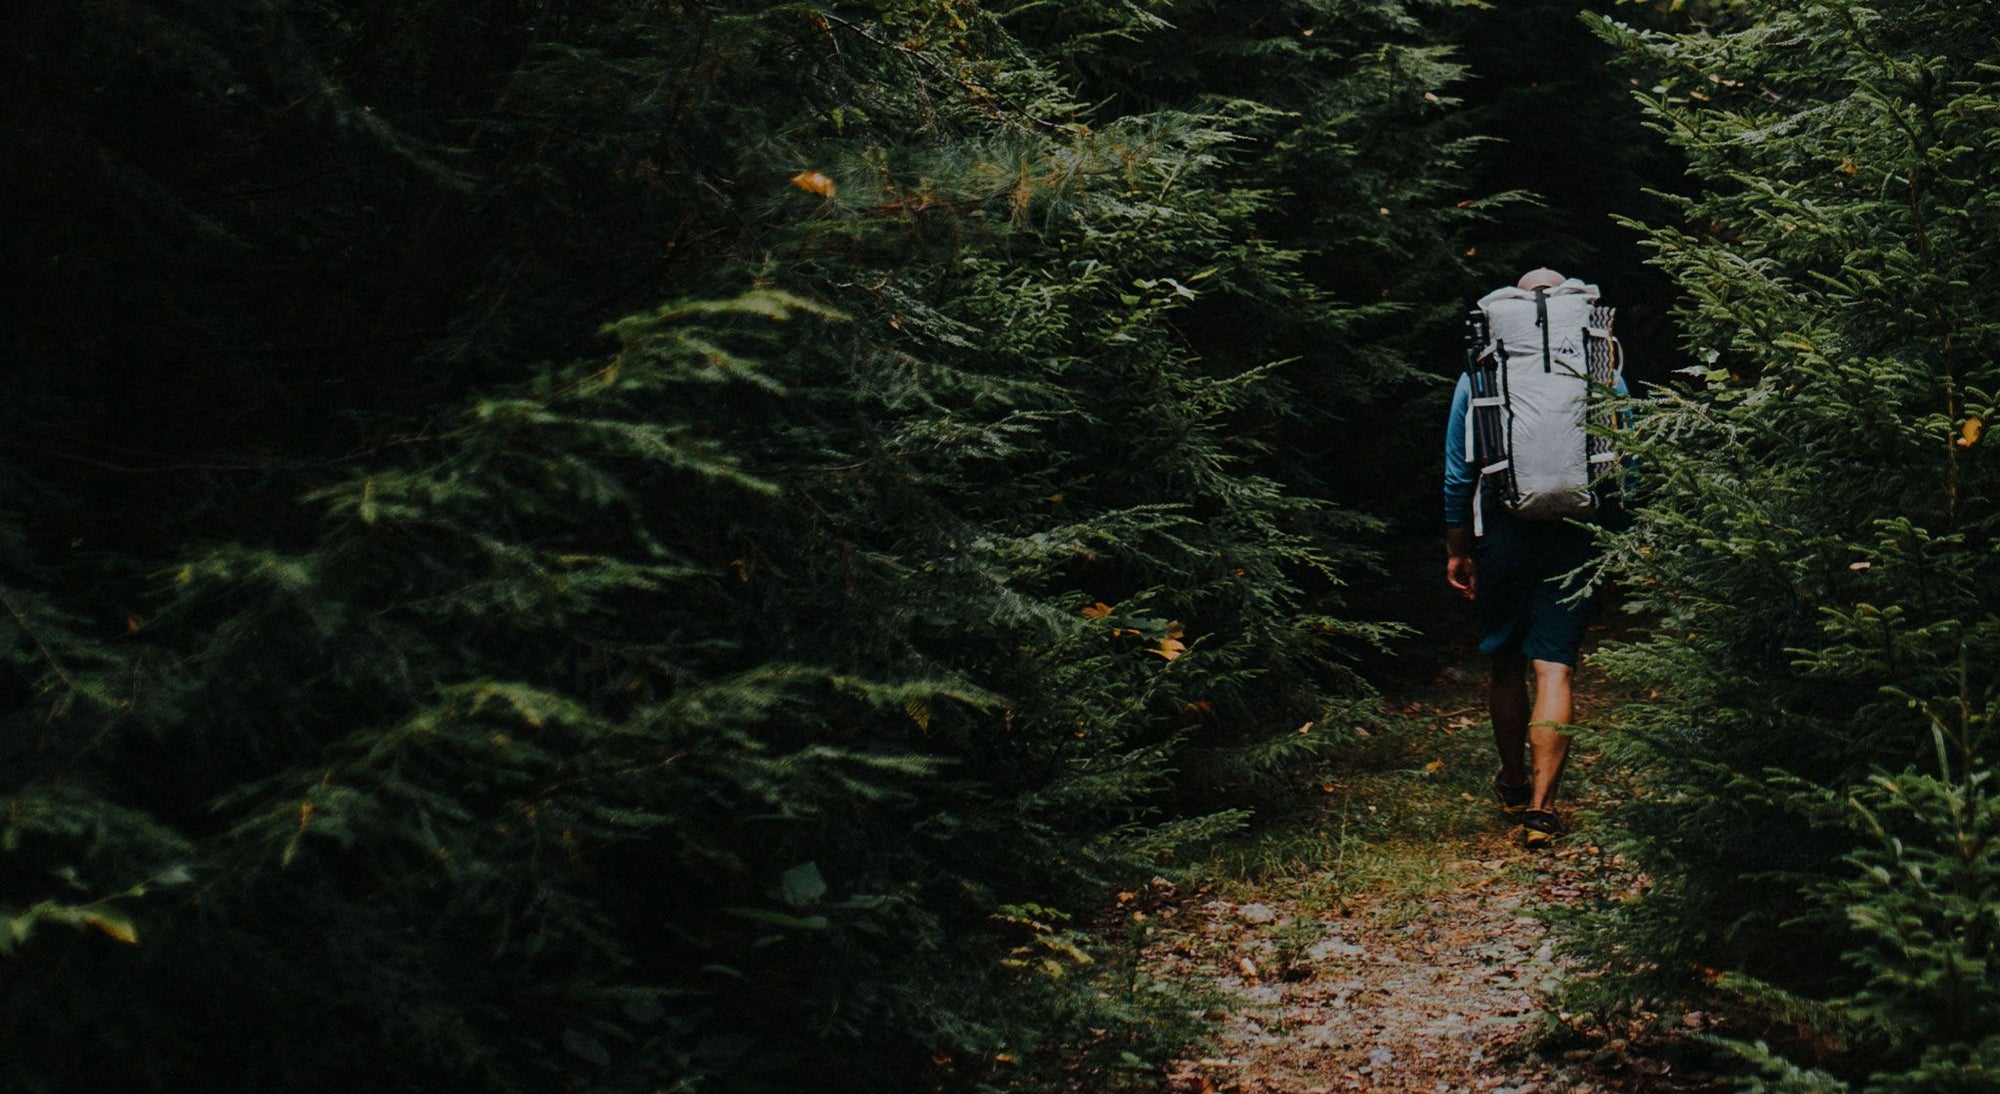 A man walking through a forest with a backpack.